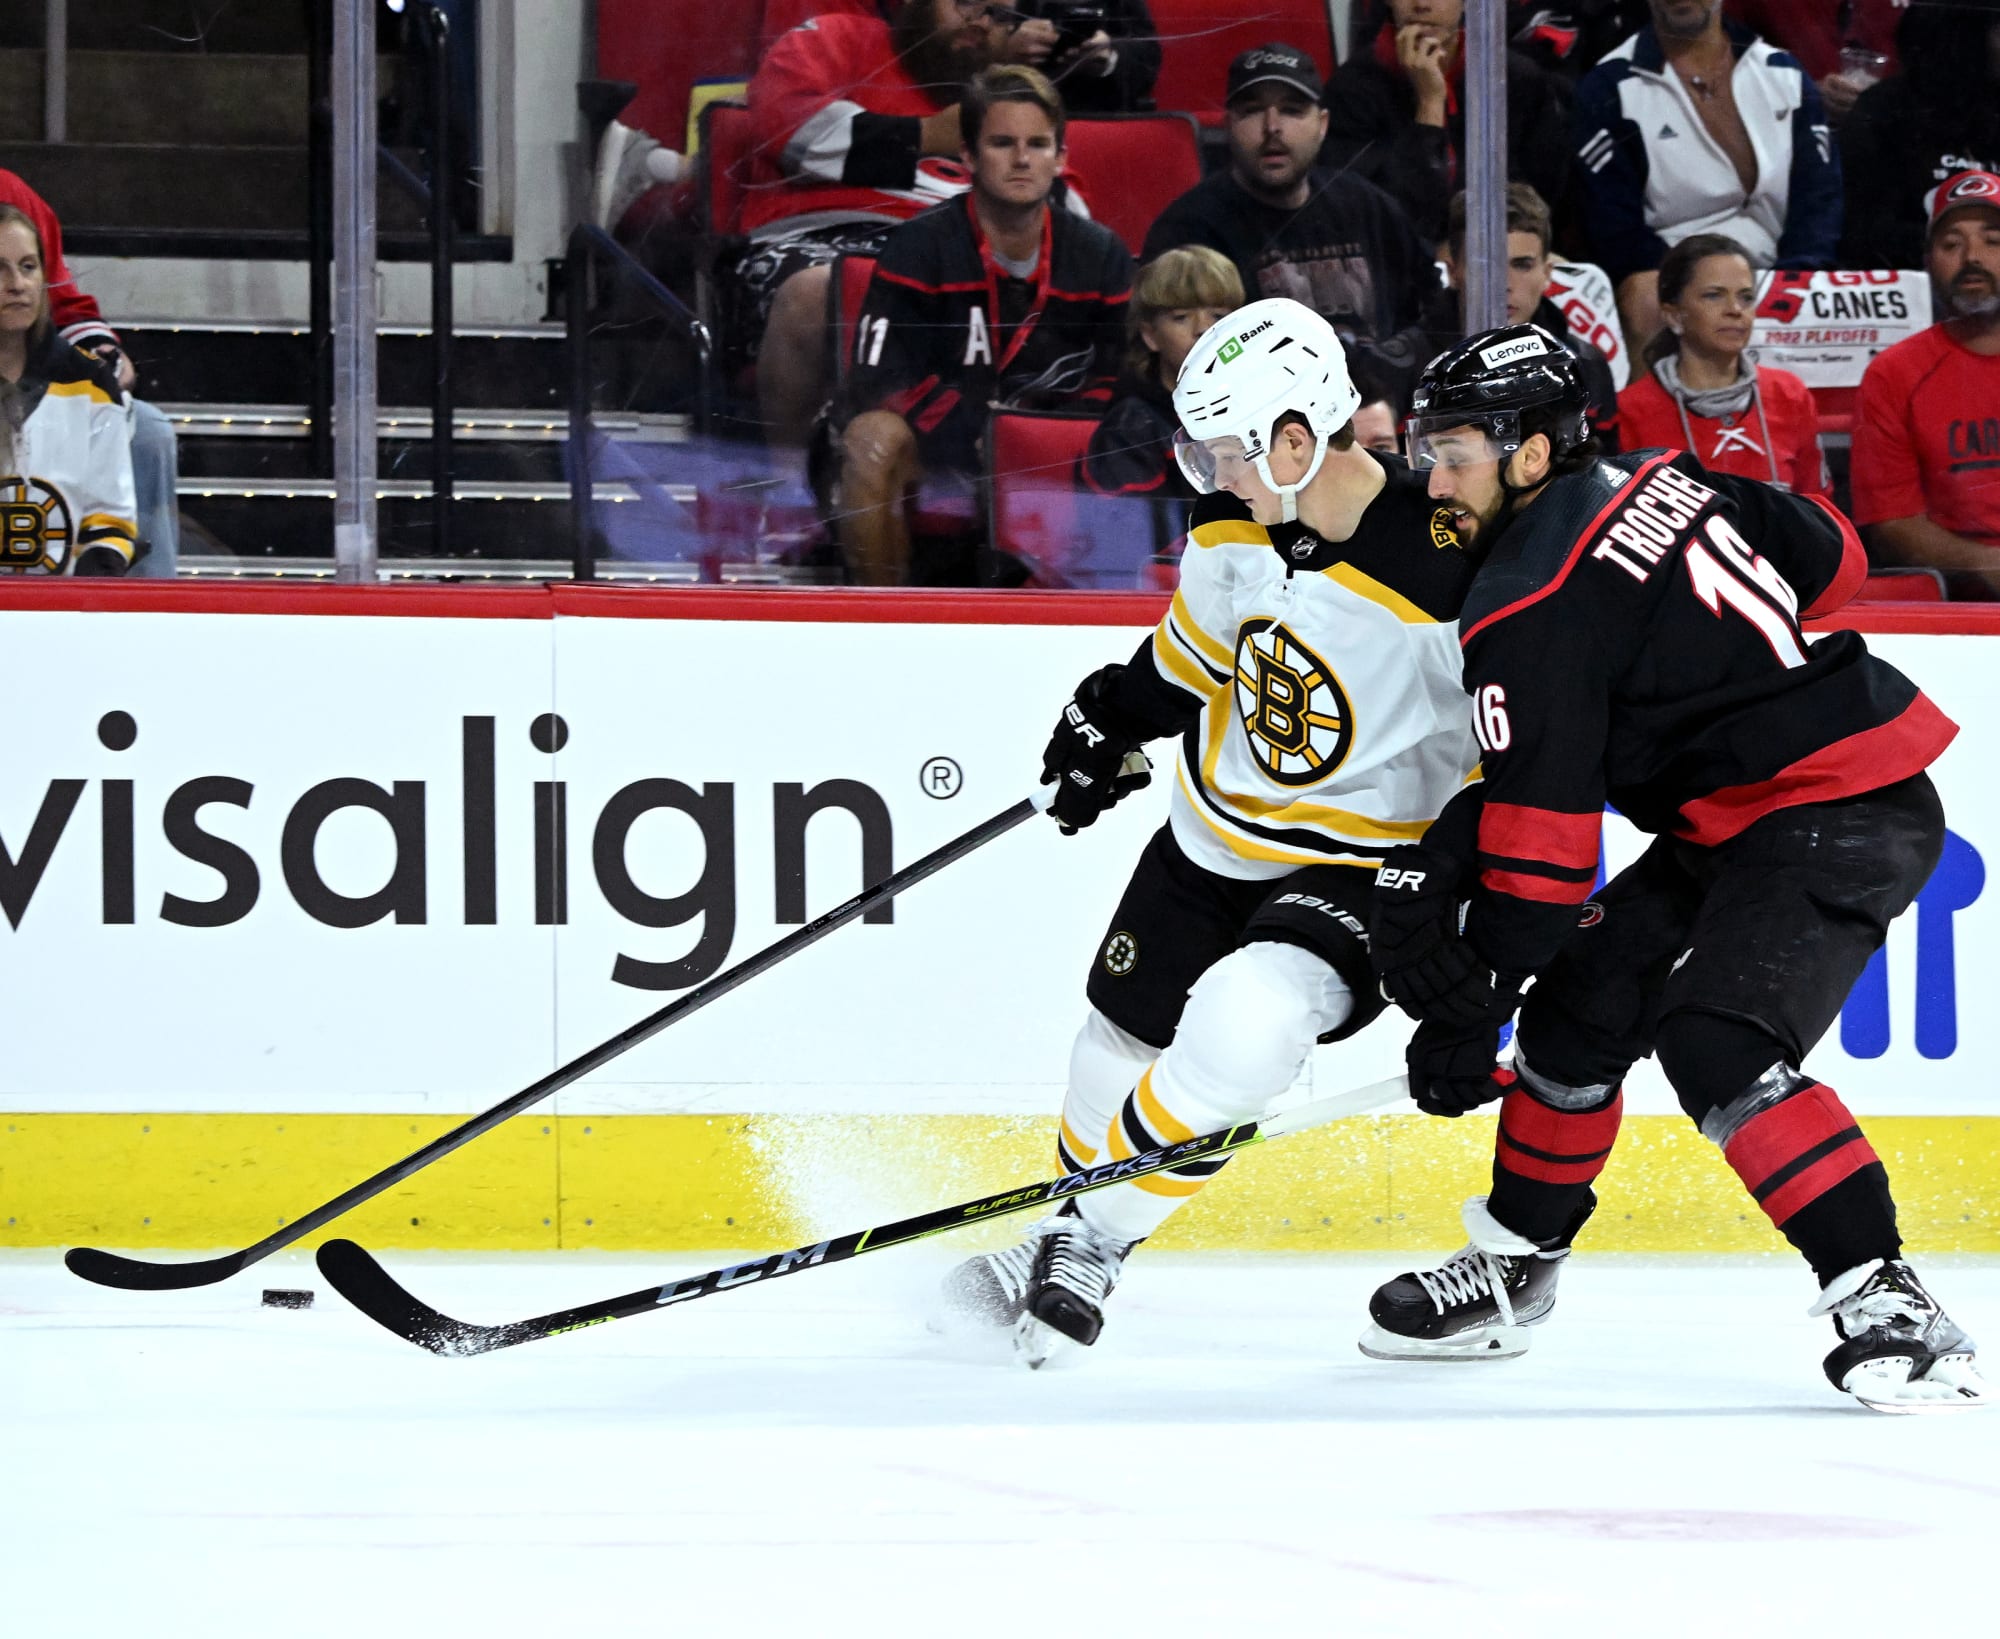 3 takeaways from the Bruins' 3-2 triumph over the Hurricanes